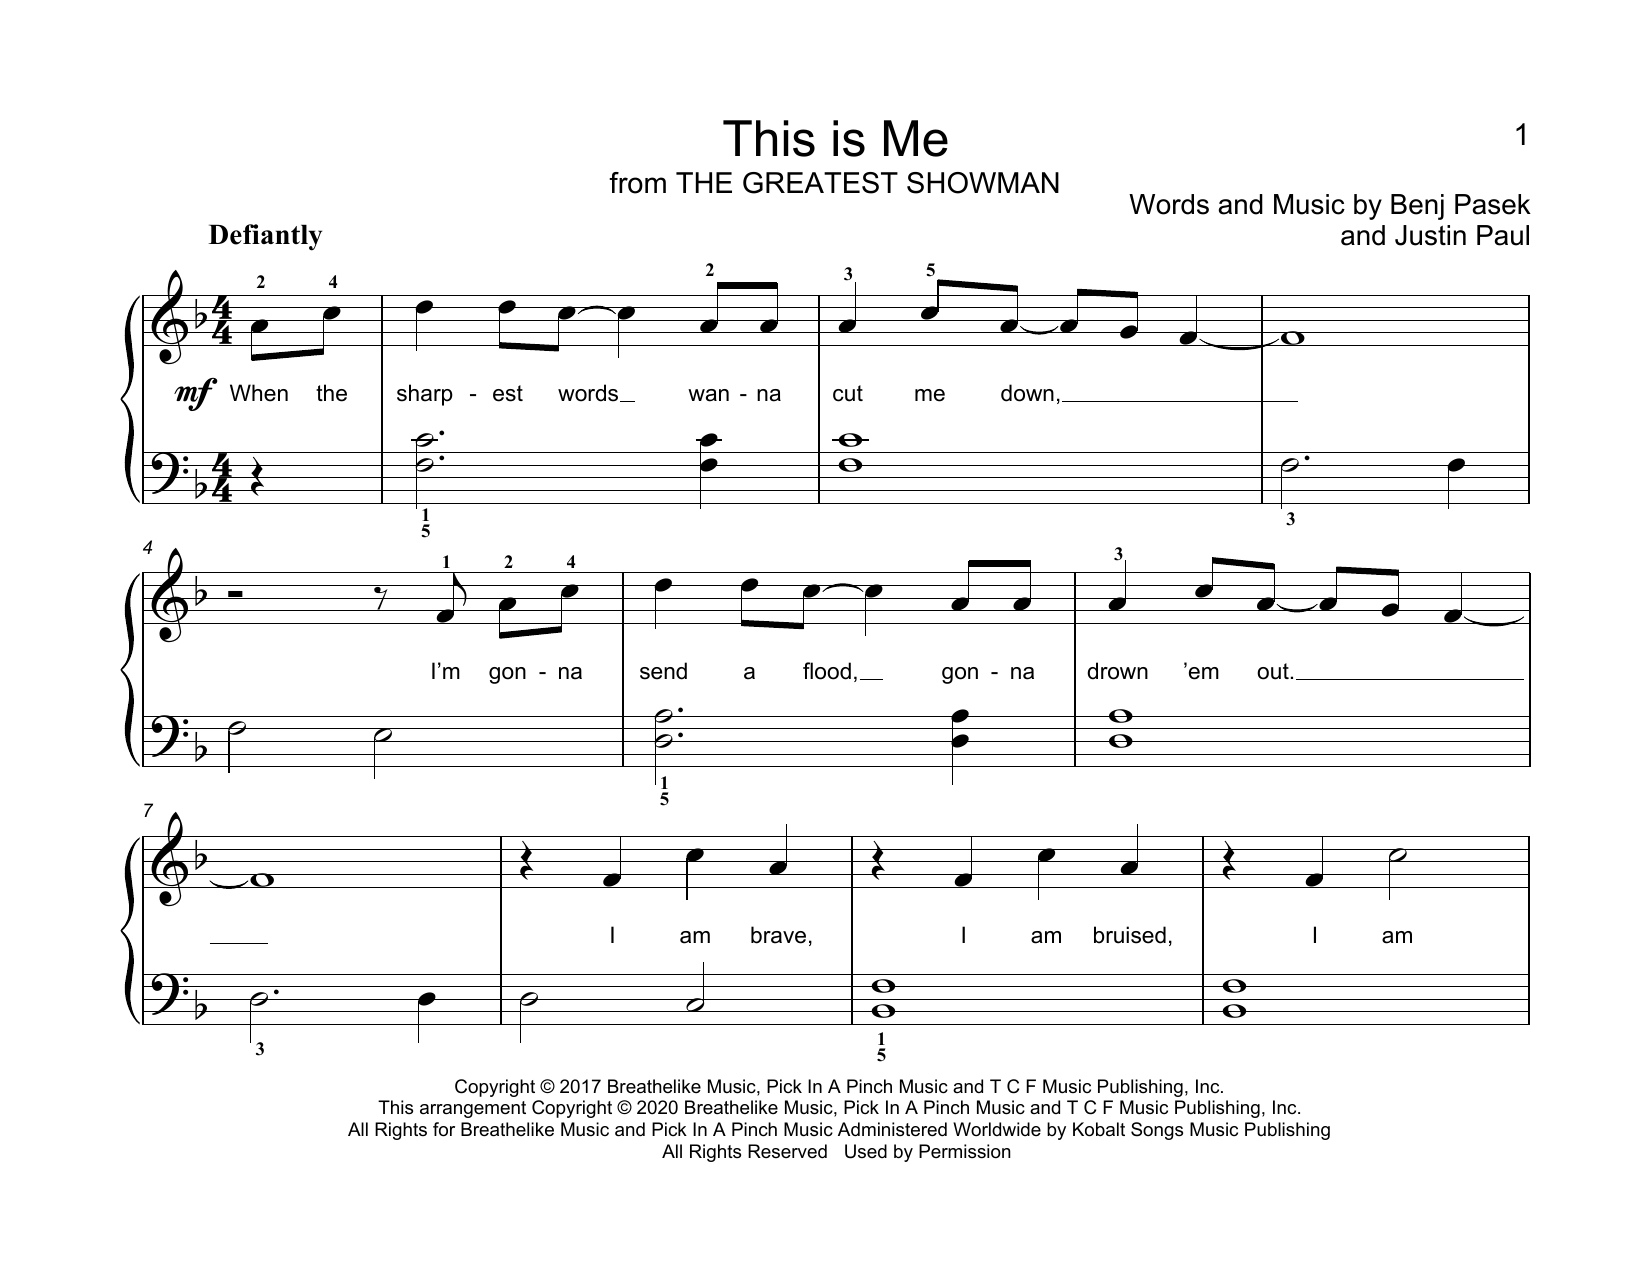 Download Pasek & Paul This Is Me (from The Greatest Showman) Sheet Music